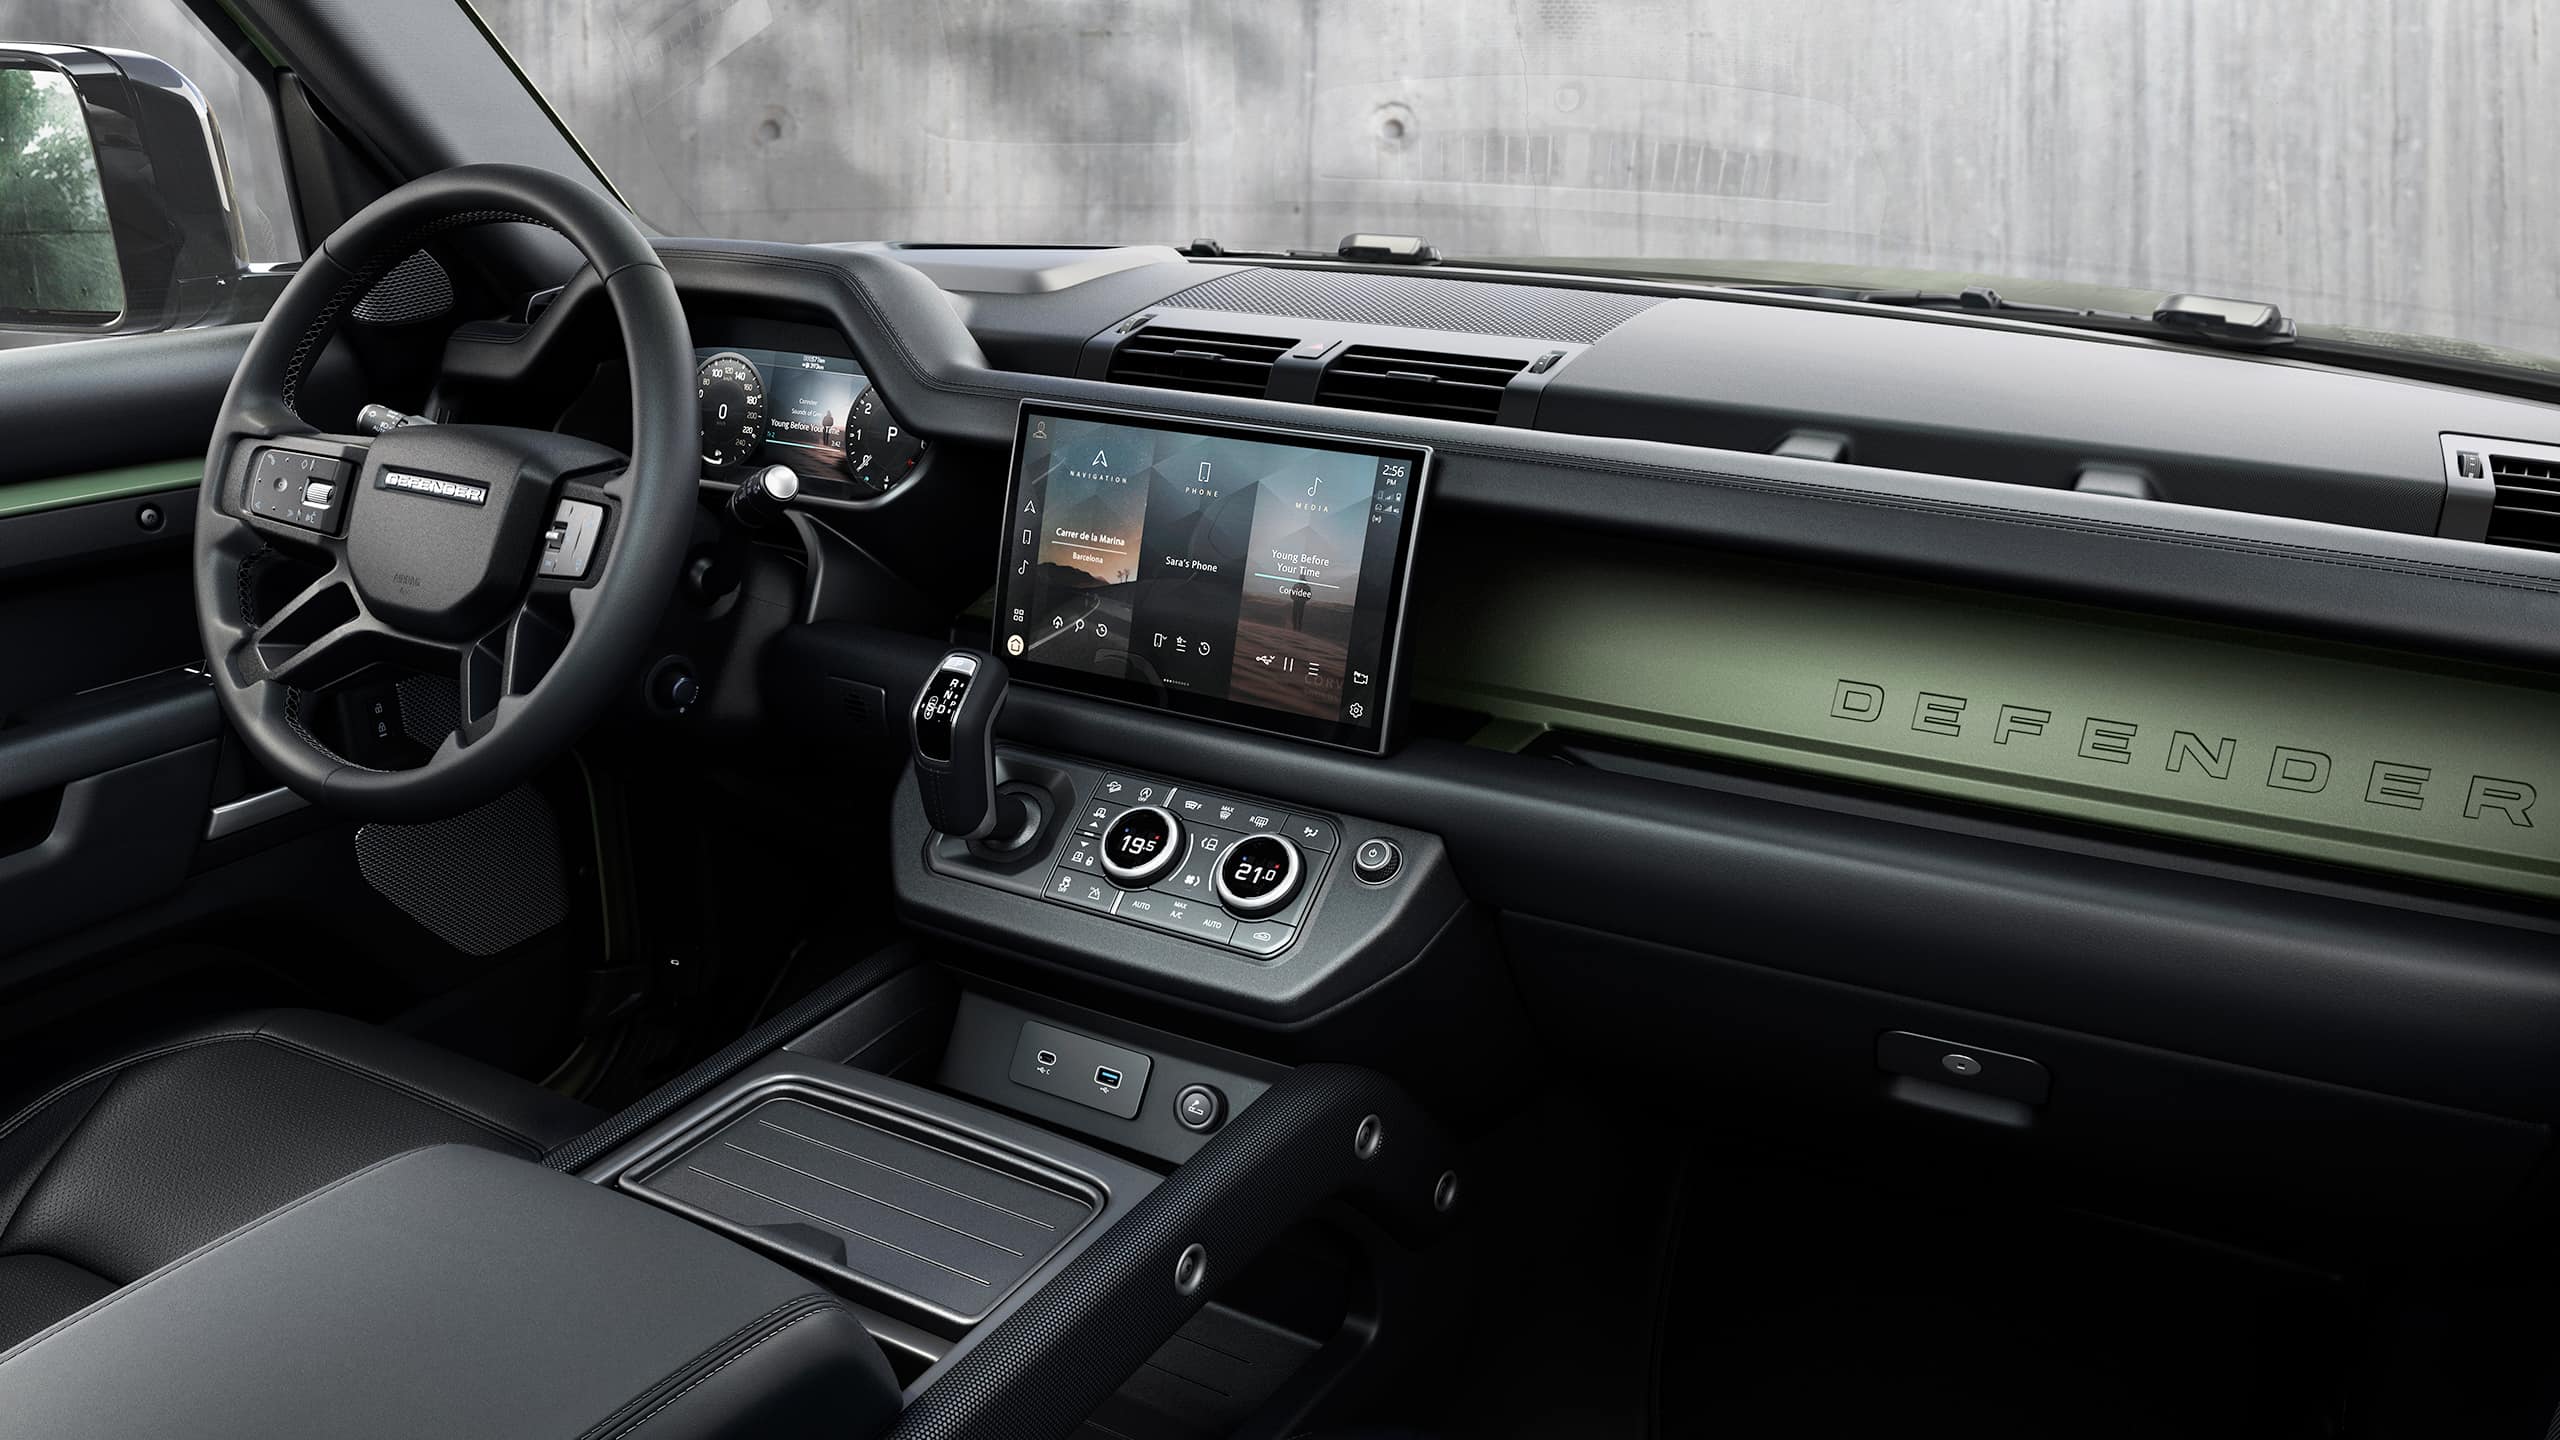 Interior view of the modern luxury car